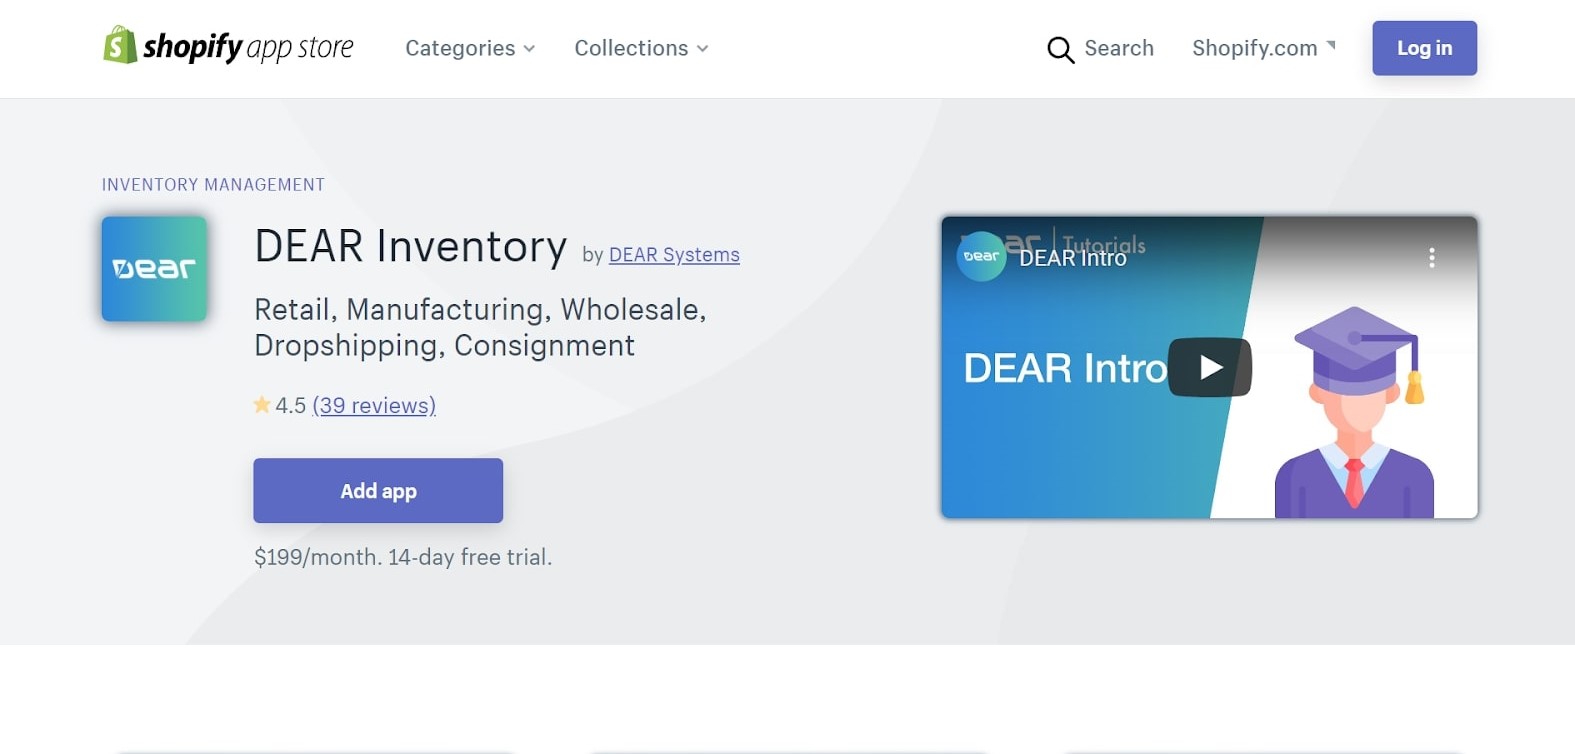 DEAR Inventory for your Shopify store